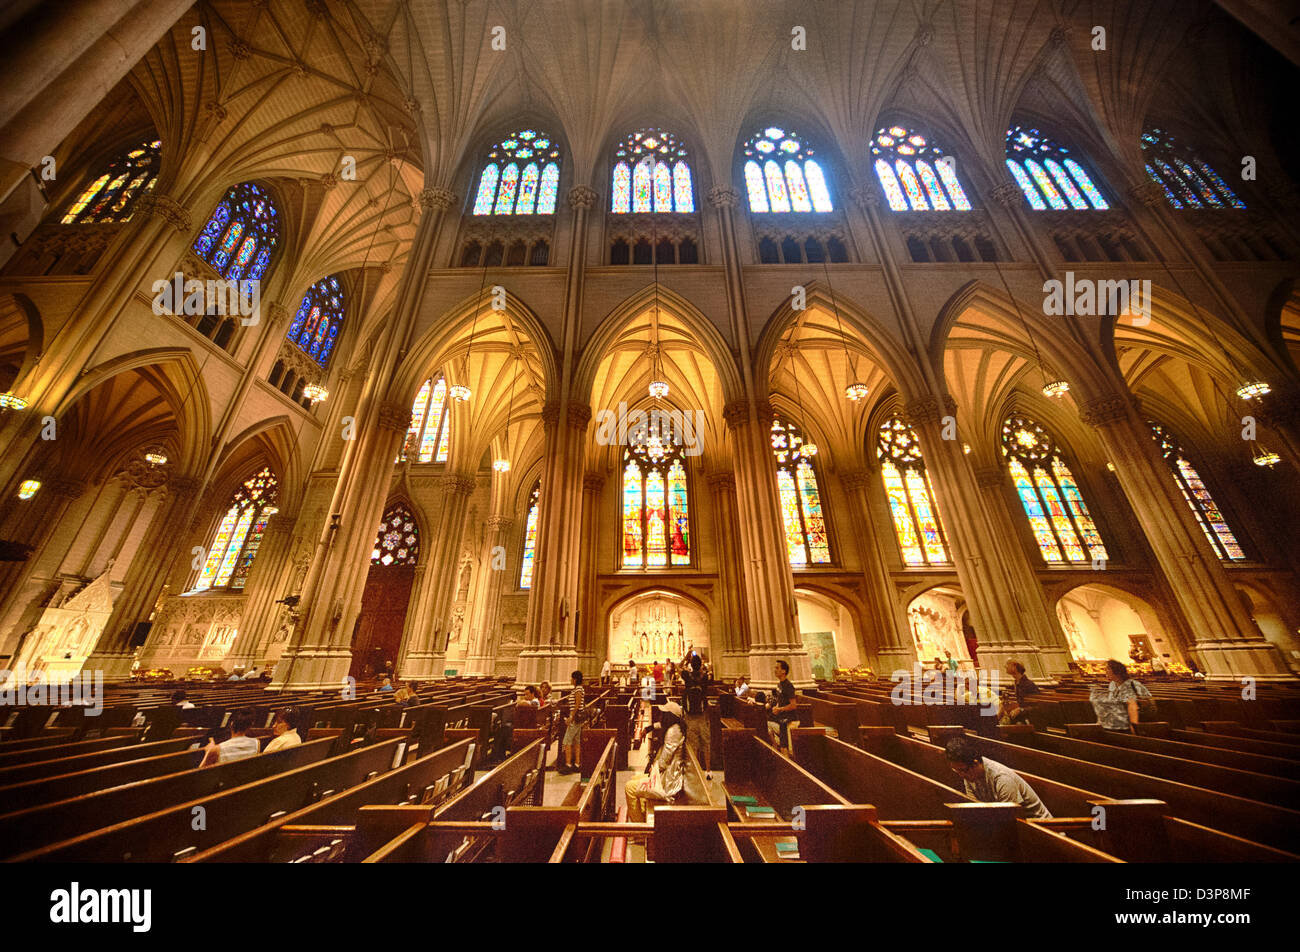 The stunning ornate interior of the neo-gothic St Patrick's Cathedral in midtown Manhattan, New York City. Stock Photo